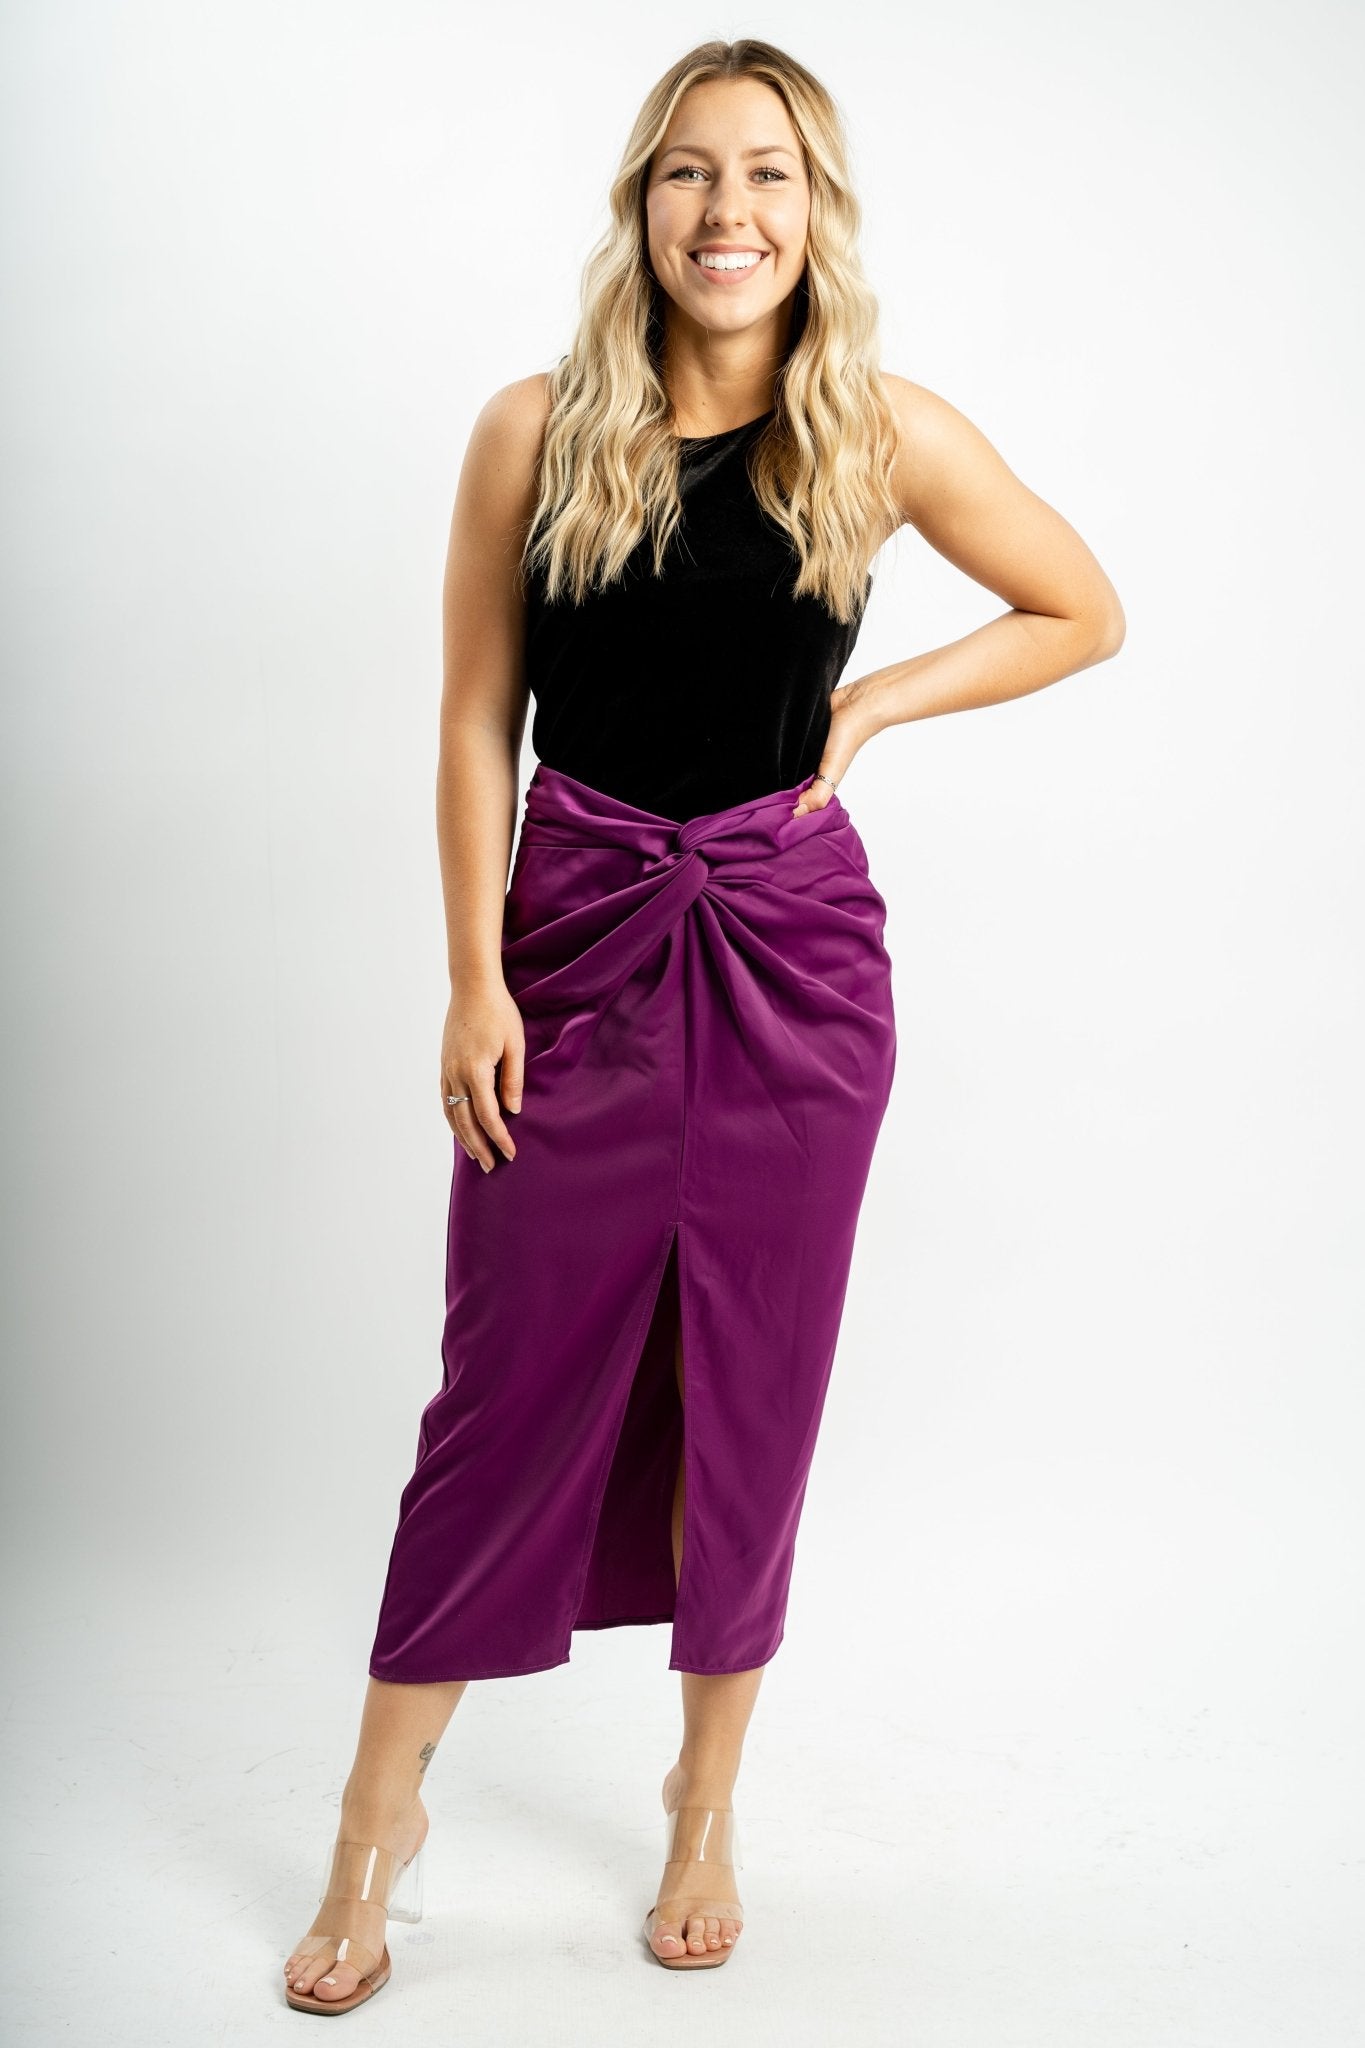 Twist waist midi skirt magenta - Trendy New Year's Eve Outfits at Lush Fashion Lounge Boutique in Oklahoma City